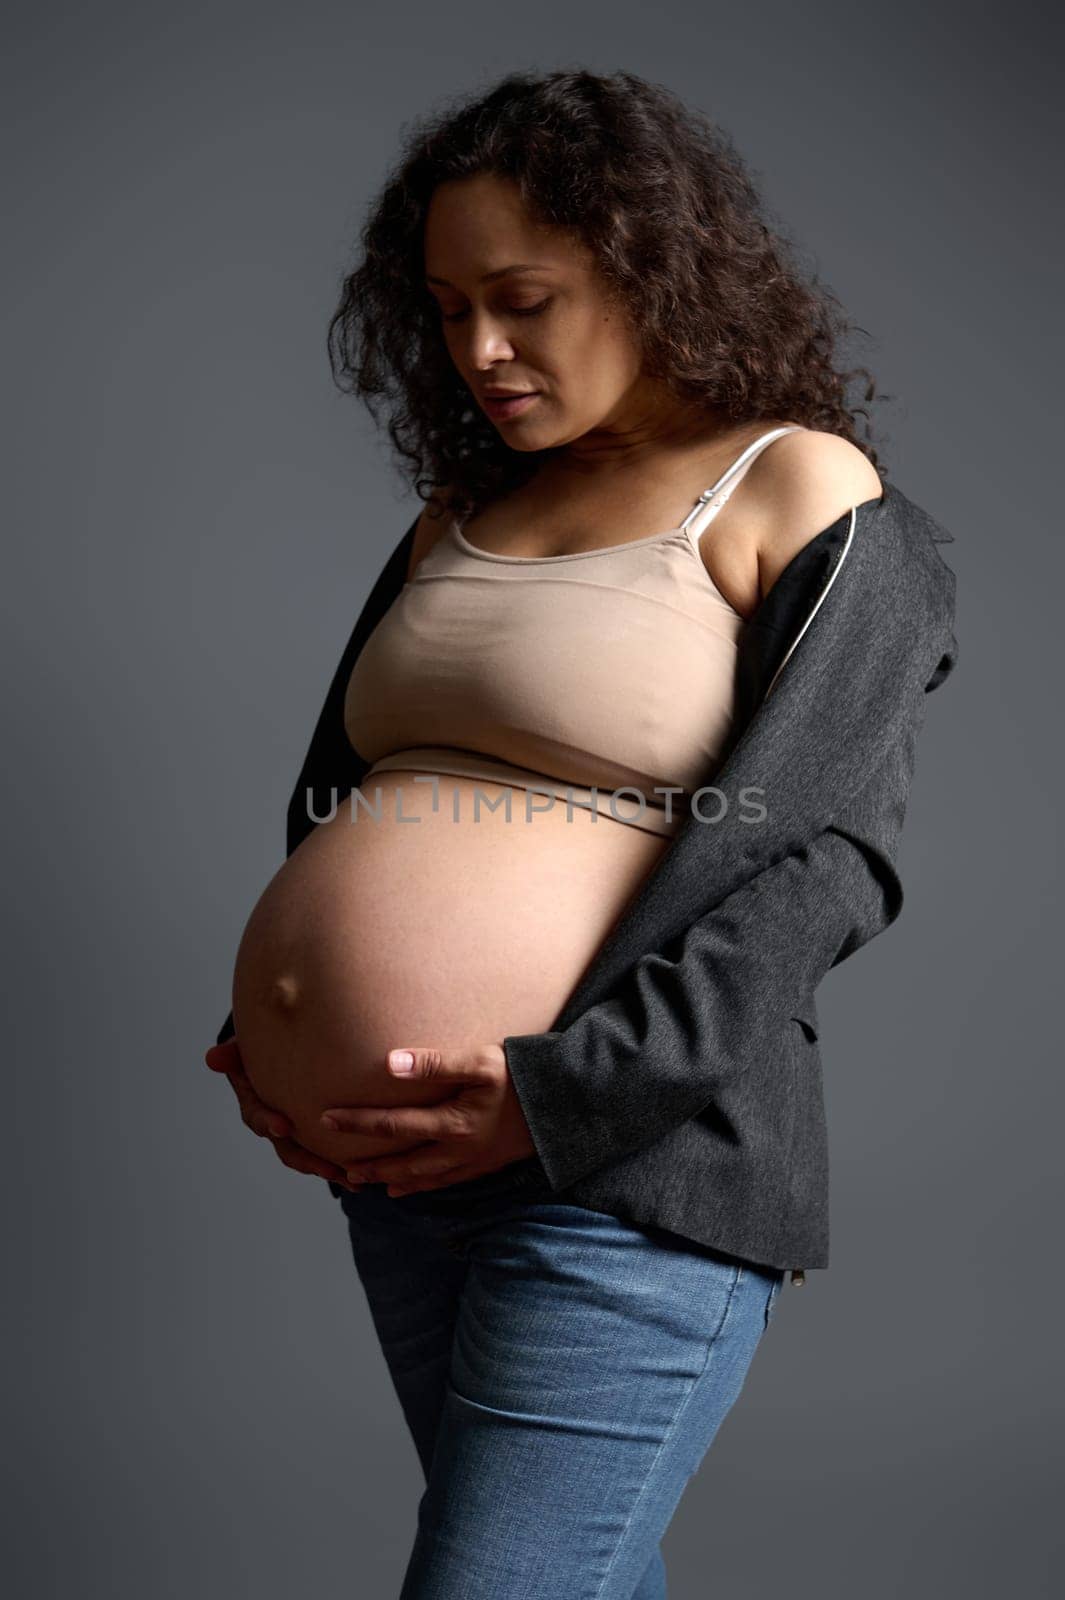 Attractive pregnant woman gently stroking her big belly, experiencing wonderful emotions feeling baby moves, isolated gray background. Happy carefree pregnancy. Maternity. Body positivity. Femininity